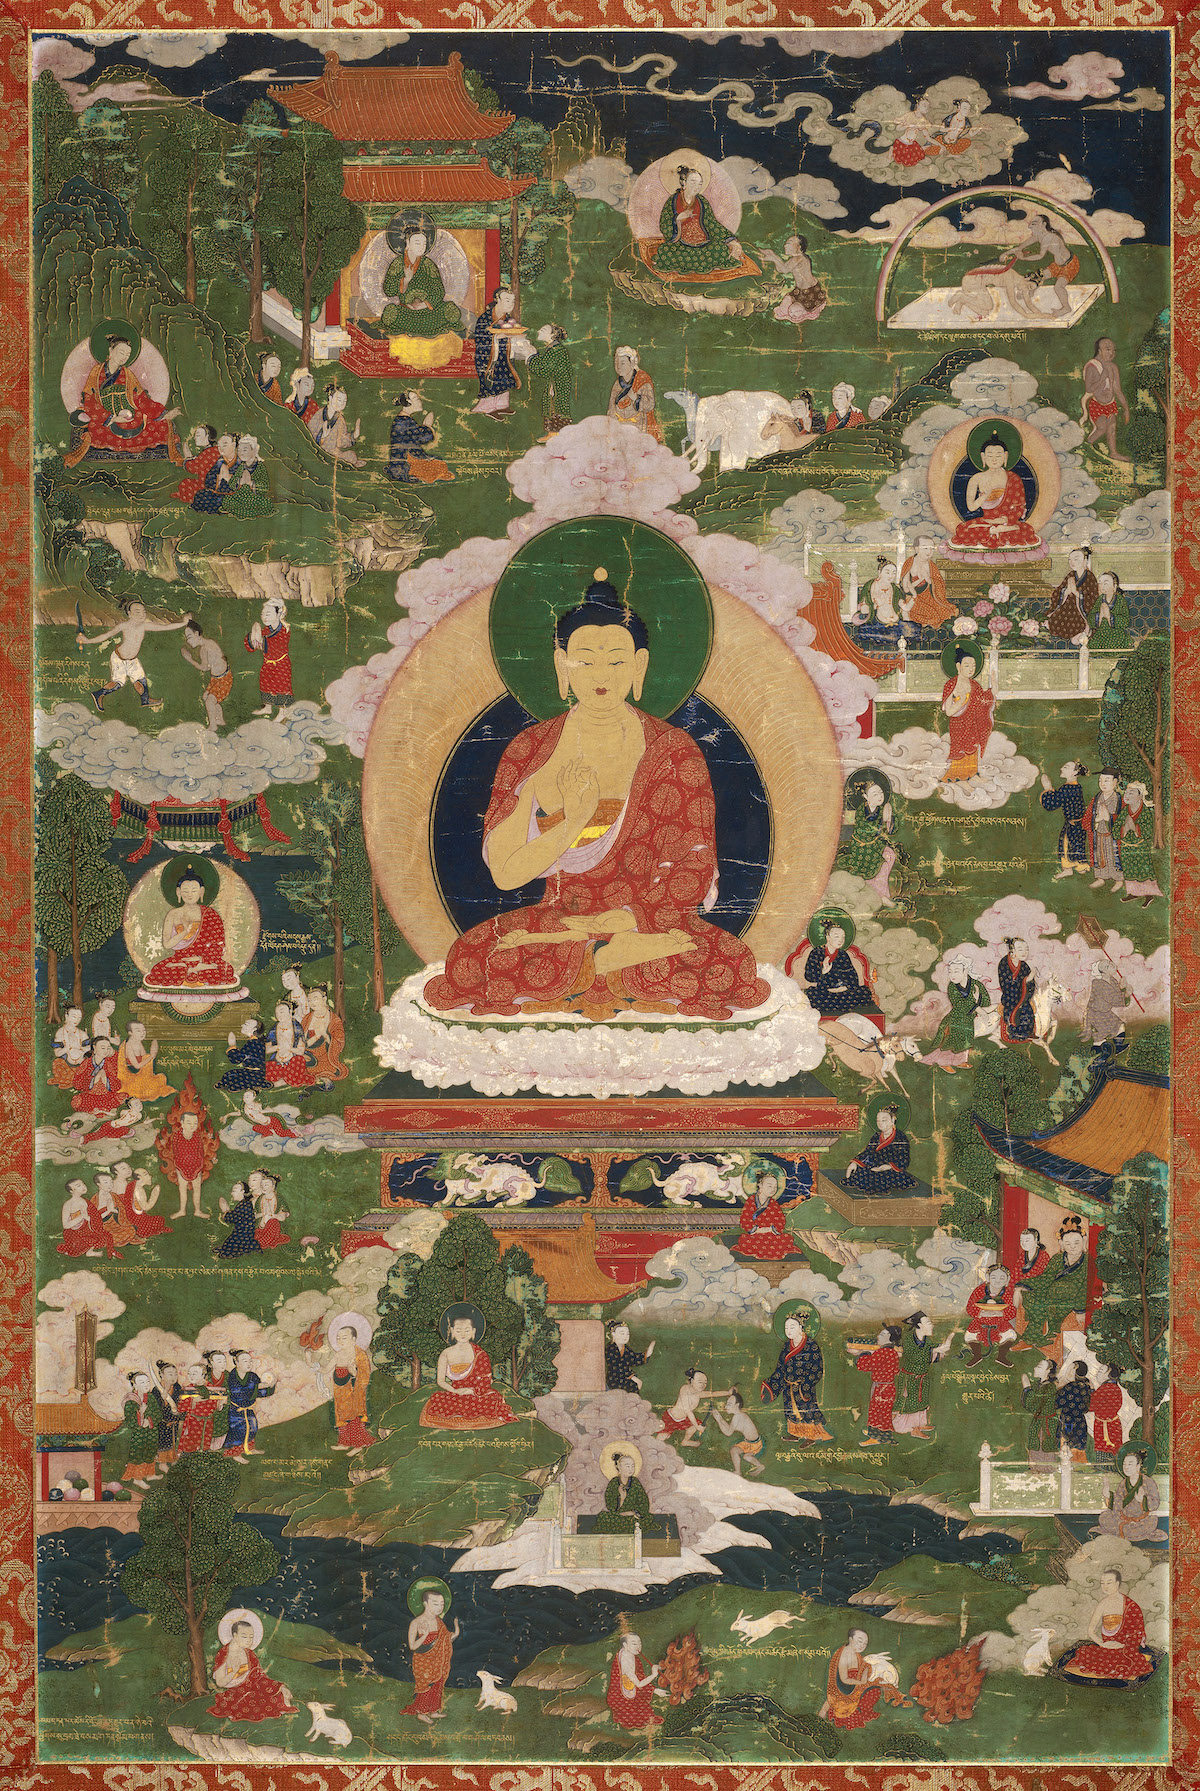 The Buddha seated cross legged on a lotus throne, surrounded by scenes from his life. Tibet, 18th century. Photograph © 2023 Museum of Fine Arts, Boston. All rights reserved. / Denman Waldo Ross Collection / Bridgeman Images.